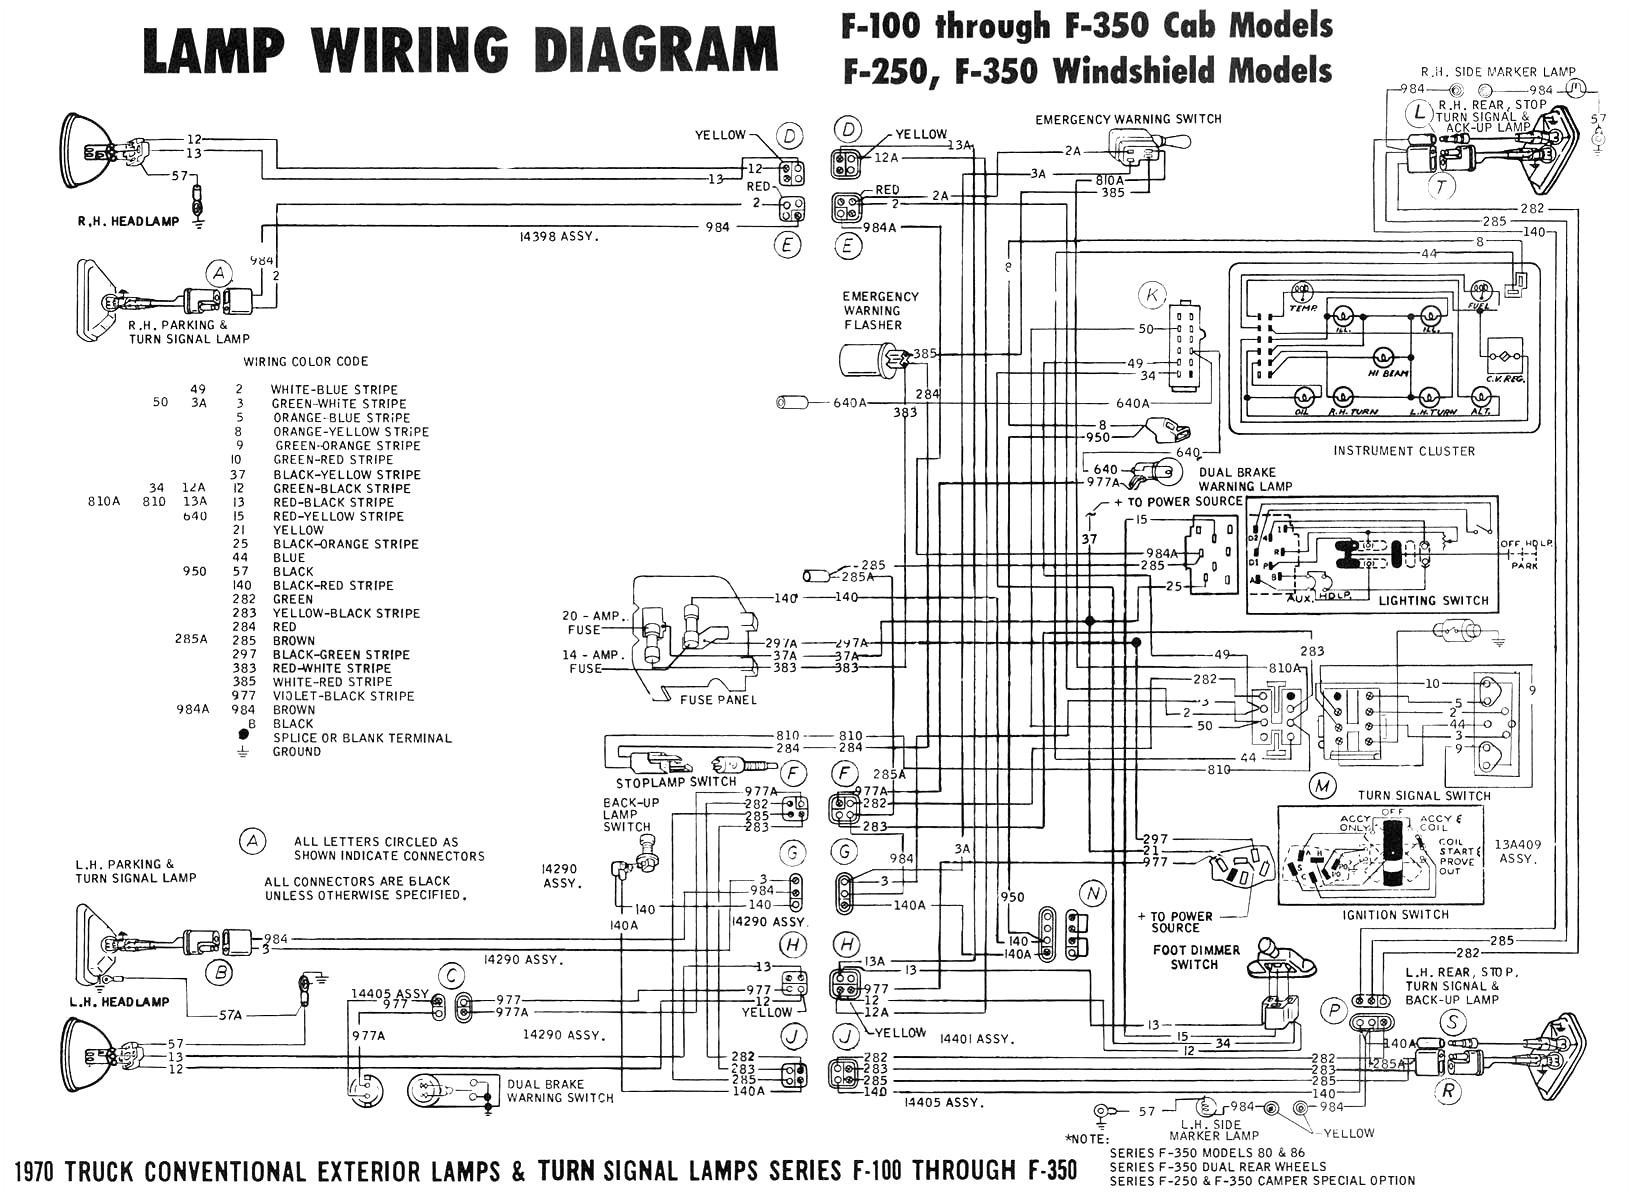 2003 ford ranger electrical wiring diagram use wiring diagram 2003 ford ranger power window wiring